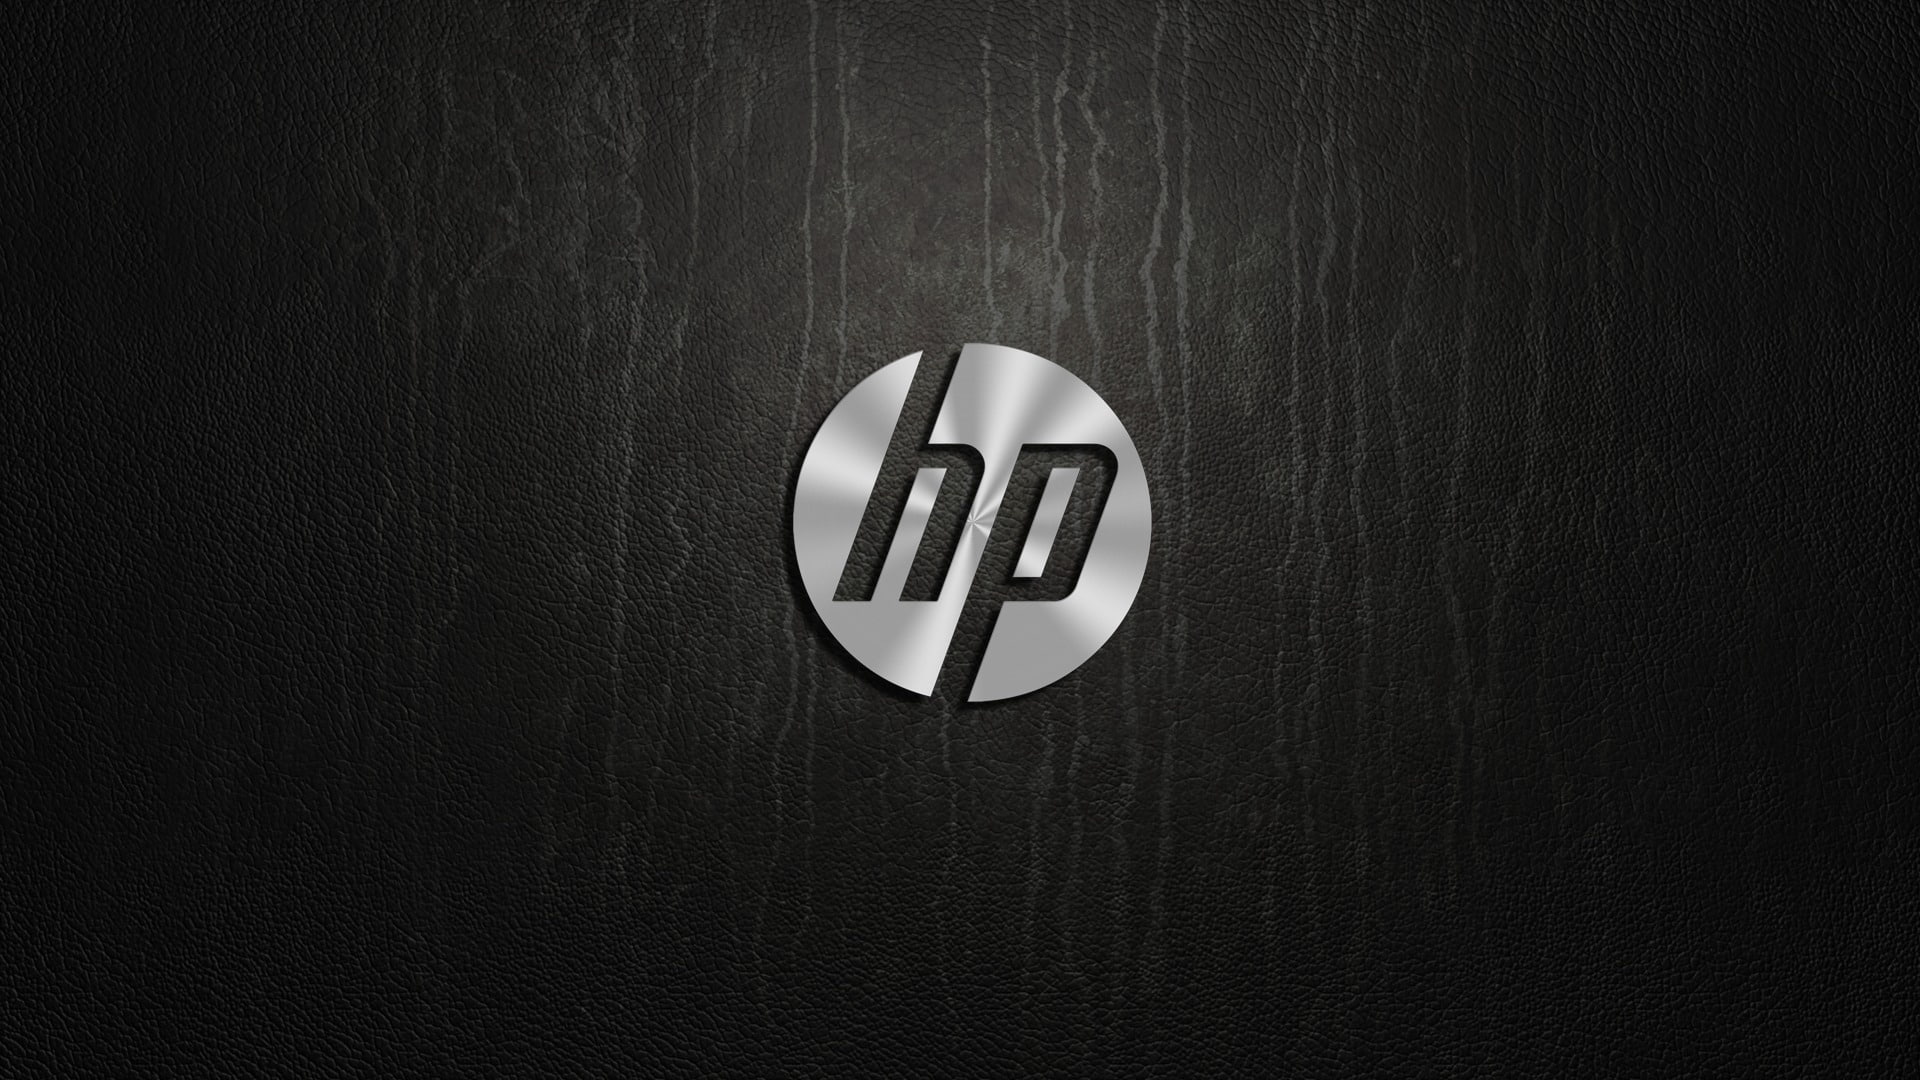 HP Logo Blue, single object, wood  material, electricity, textured